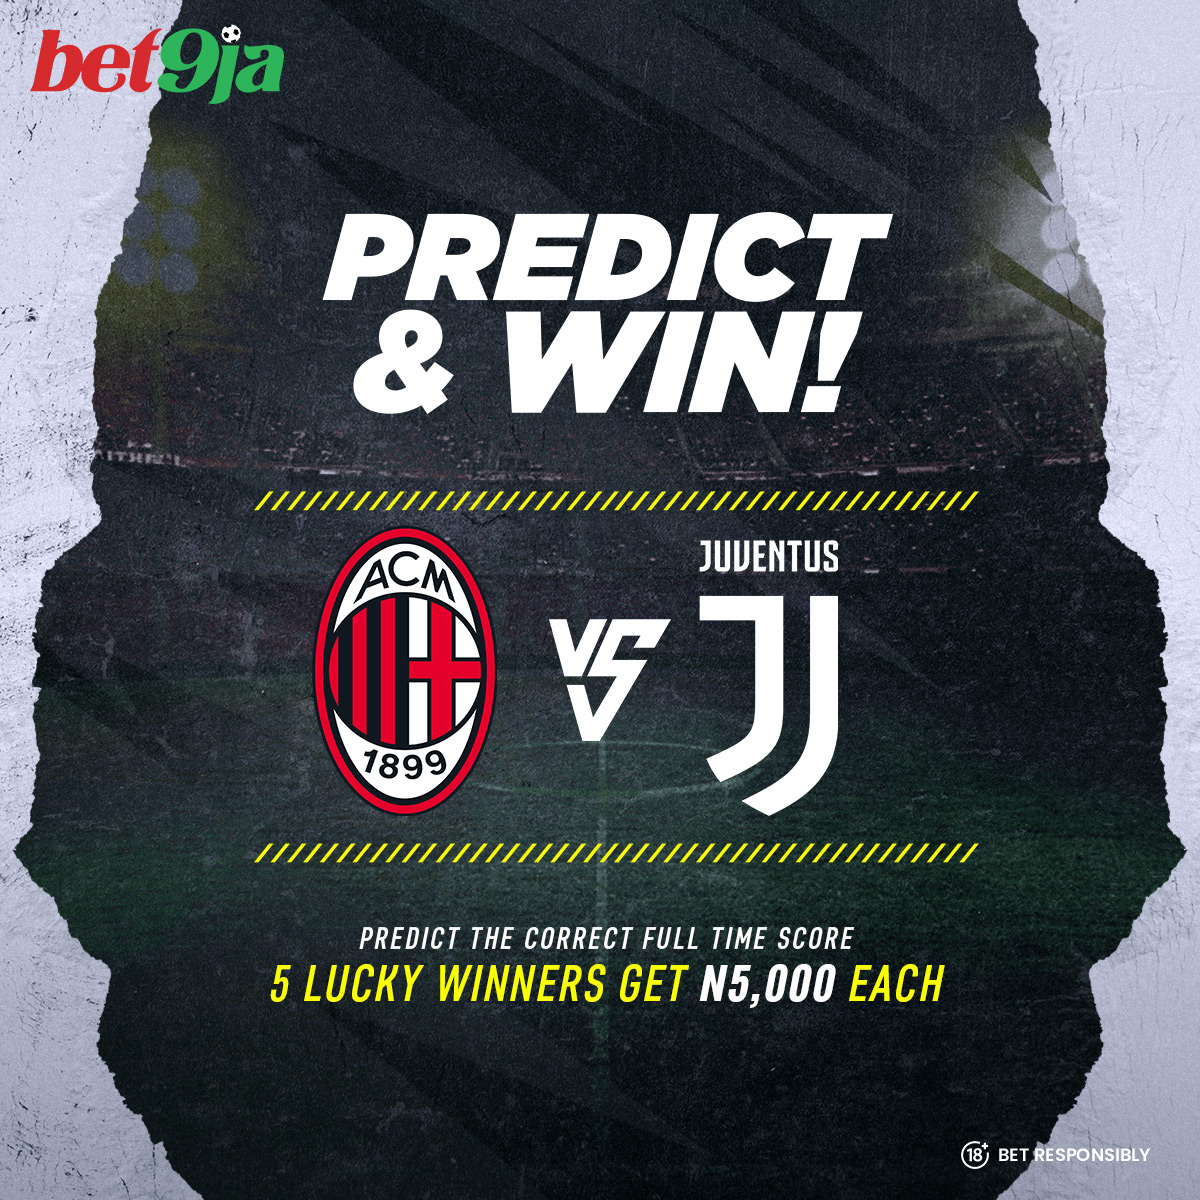 Comment the correct full-time score & your 𝐛𝐞𝐭𝟗𝐣𝐚 𝐈𝐃 and stand a chance to win N5,000 All predictions end on Friday 20th October 2023 at 7 pm Multiple and/or edited comments will be disqualified. Five winners will be selected at random #Bet9jaPredictAndwin